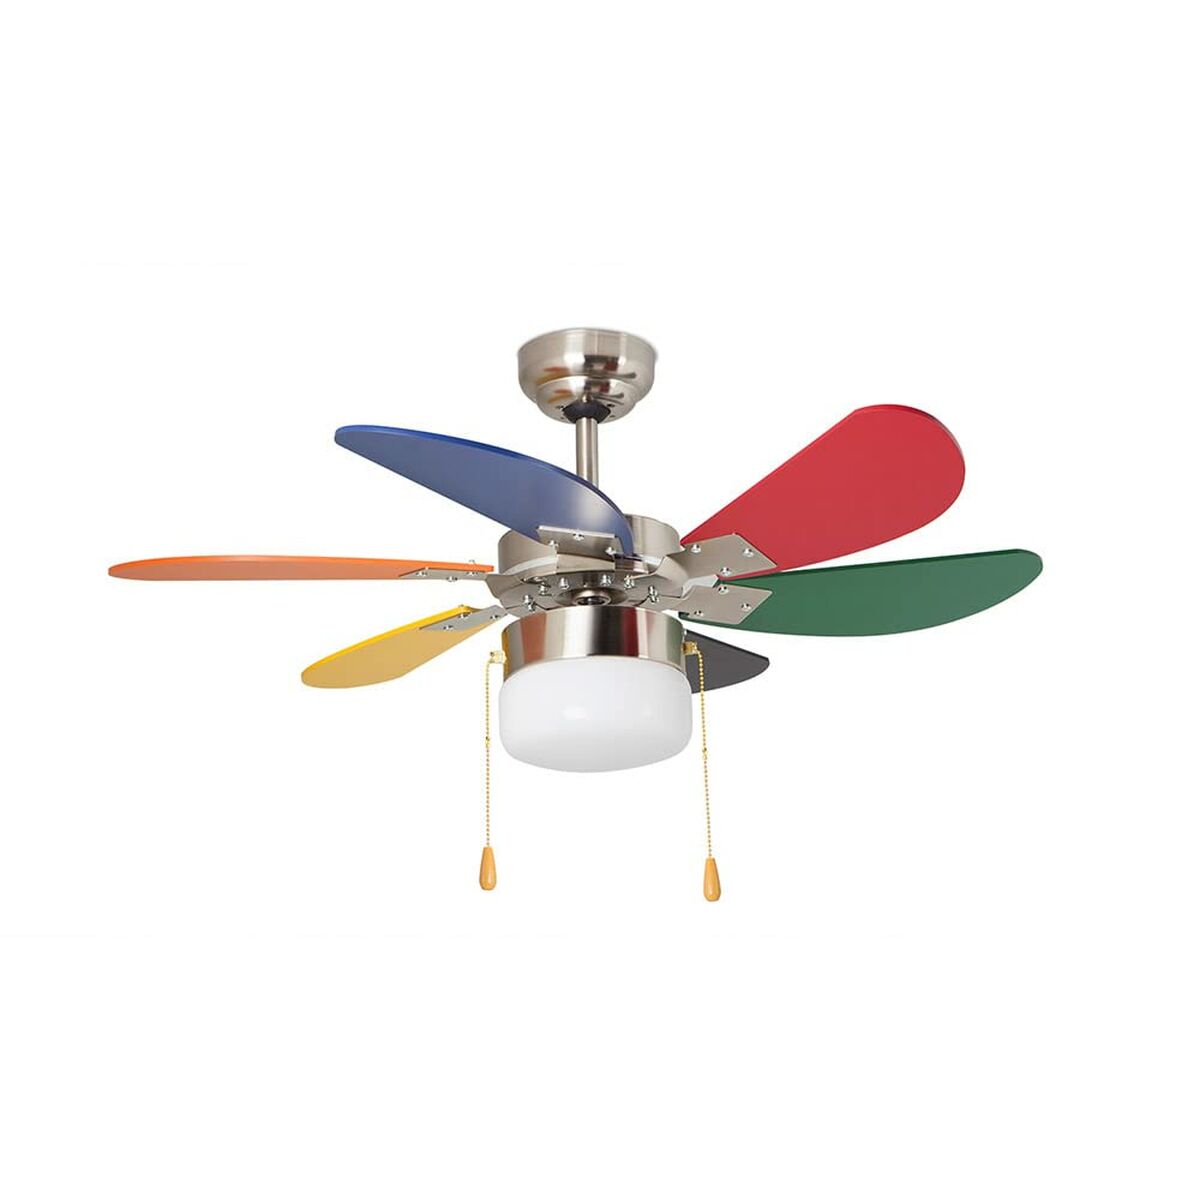 Ceiling Fan Orbegozo CC-20132 Multicolour 55 W, Orbegozo, Home and cooking, Portable air conditioning, ceiling-fan-orbegozo-cc-20132-multicolour-55-w, Brand_Orbegozo, category-reference-2399, category-reference-2450, category-reference-2451, category-reference-t-19656, category-reference-t-21087, category-reference-t-25217, Condition_NEW, ferretería, Price_100 - 200, summer, RiotNook